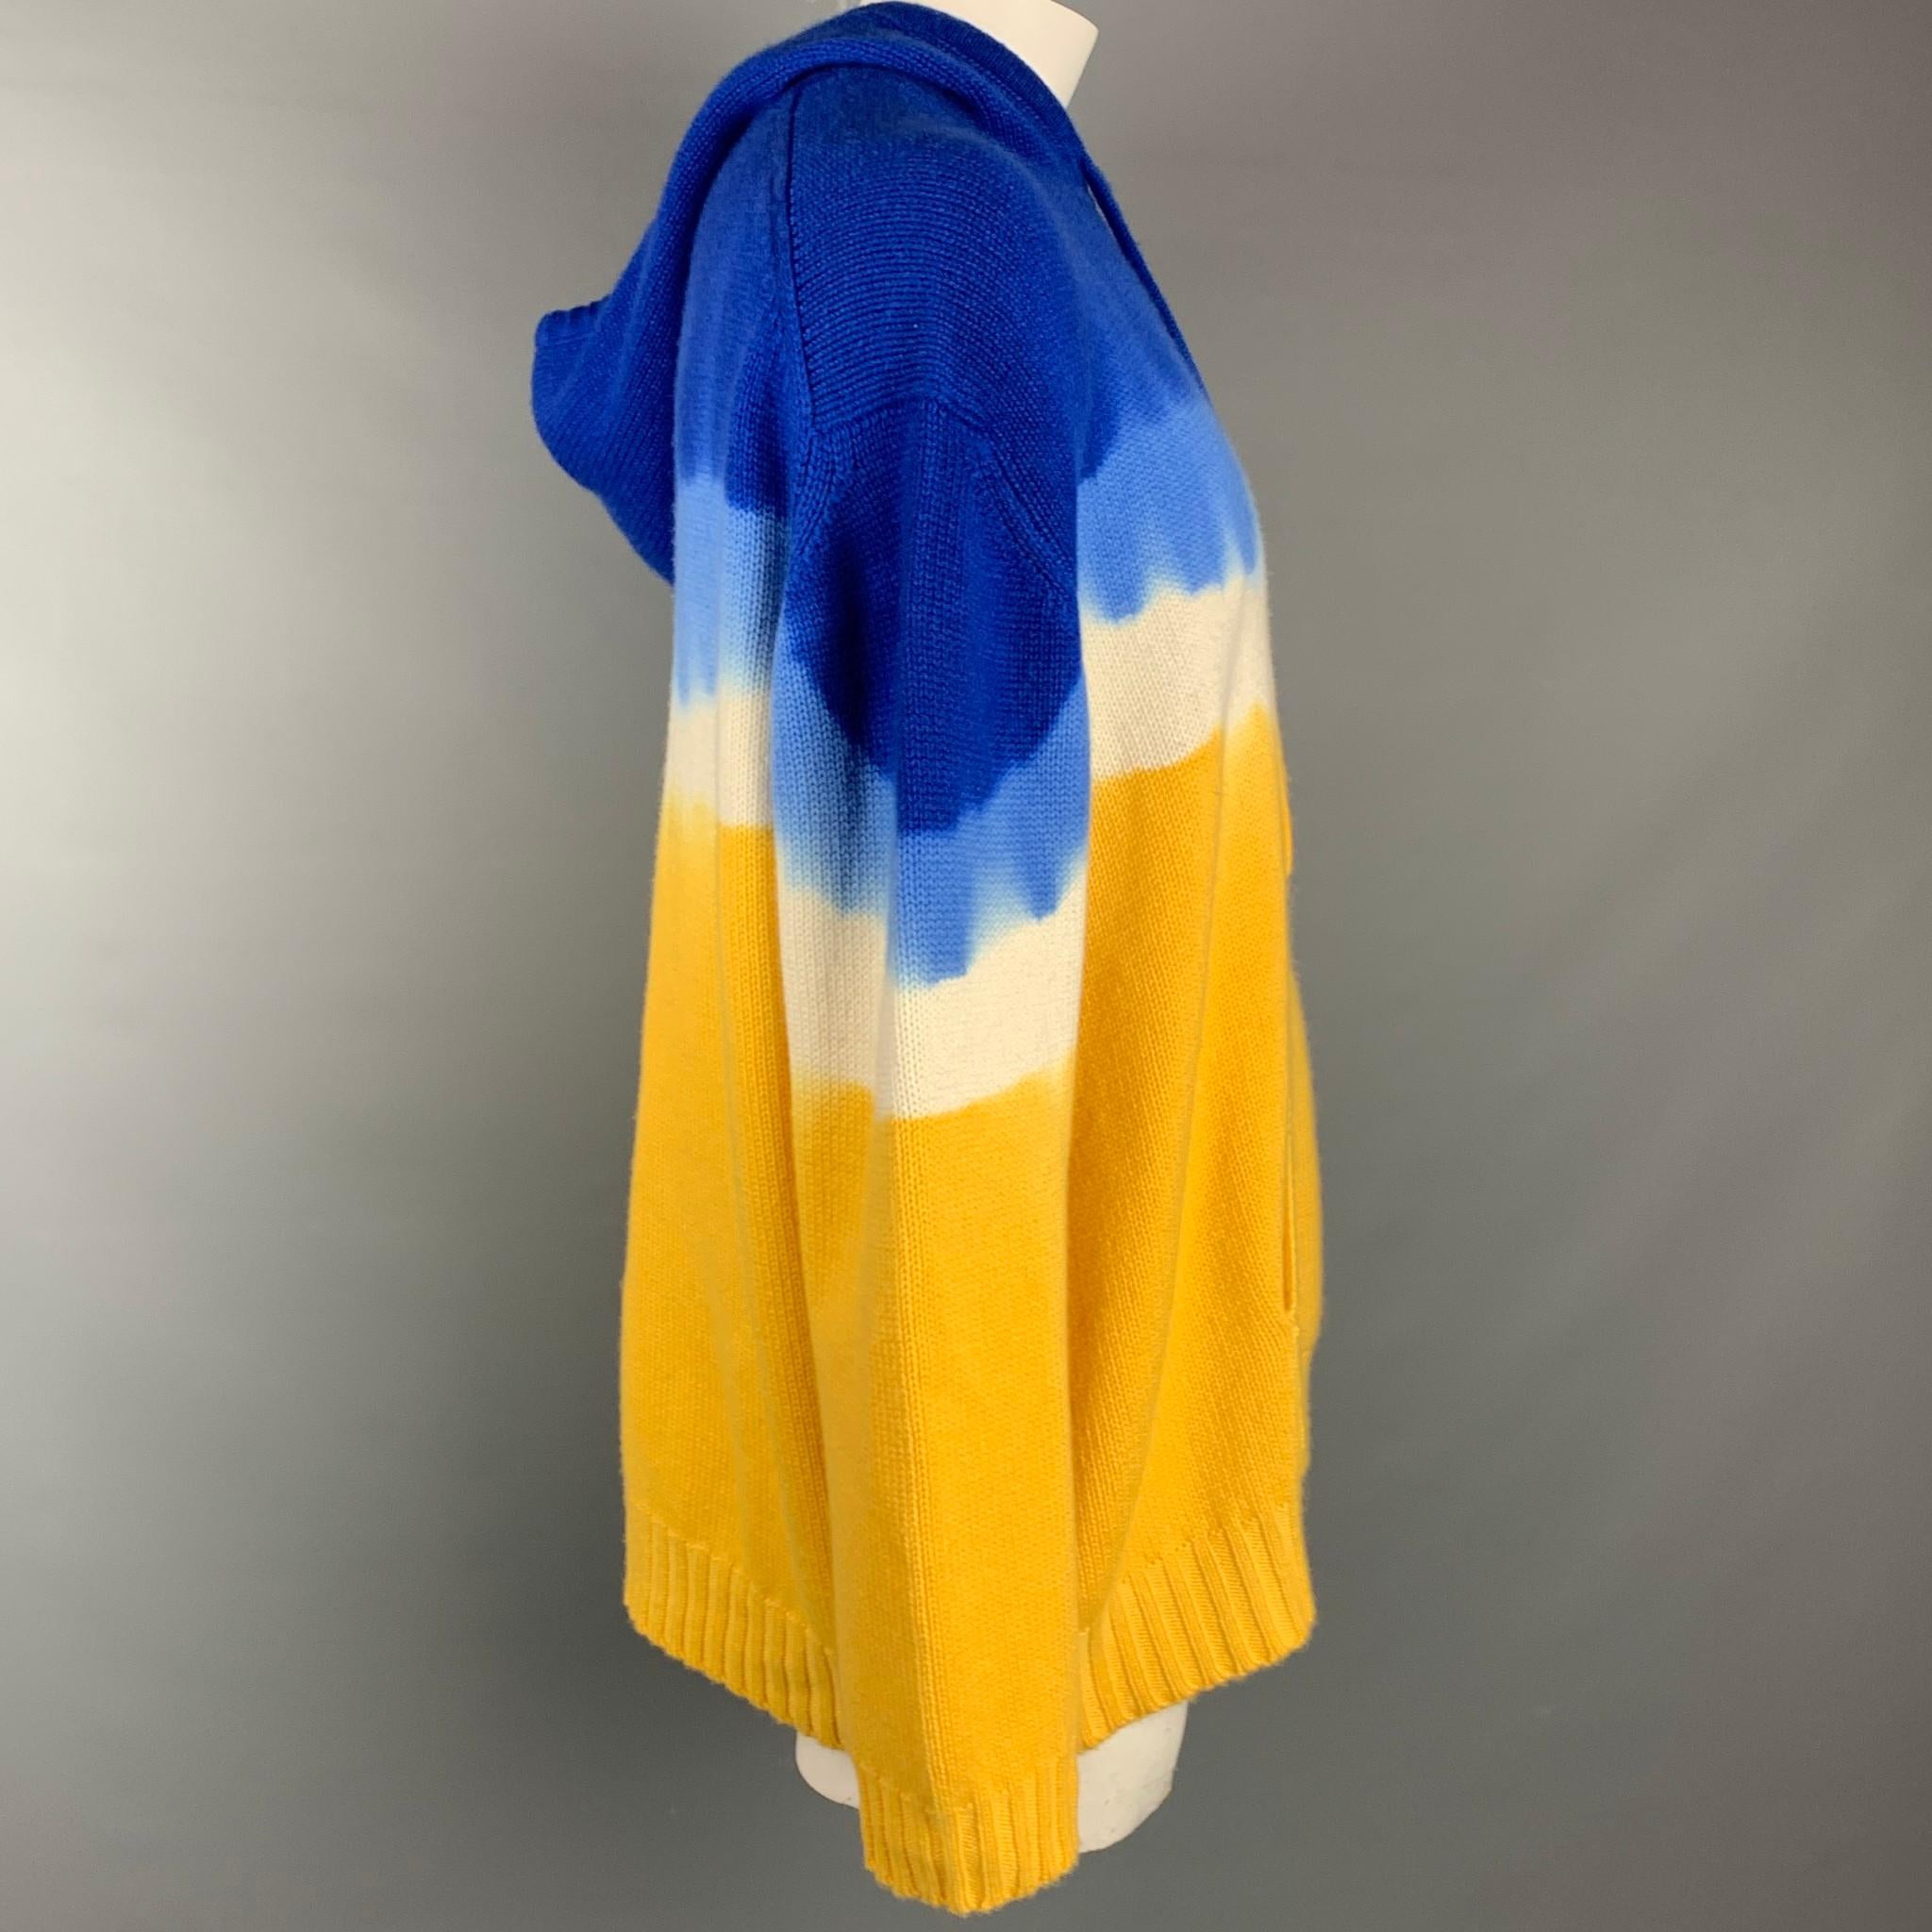 PRABAL GURUNG sweater comes in a blue & yellow knitted tie dye cashmere featuring a hooded style, front pocket, and a drawstring detail.

Very Good Pre-Owned Condition.
Marked: XL
Original Retail Price: $1,395.00

Measurements:

Shoulder: 25